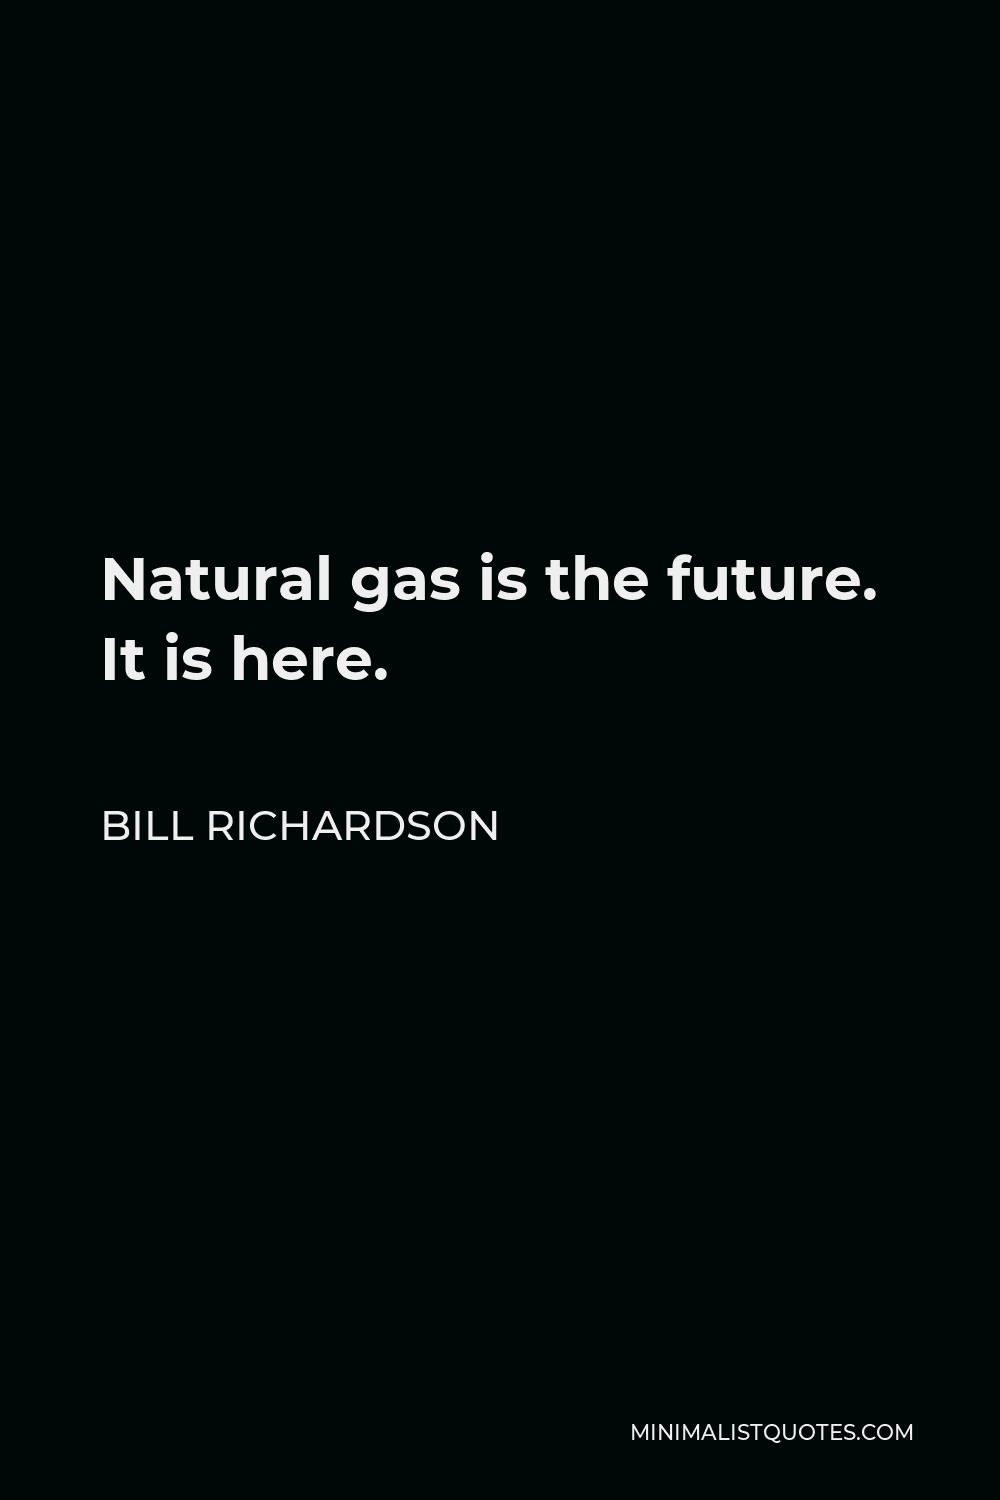 Bill Richardson Quote - Natural gas is the future. It is here.